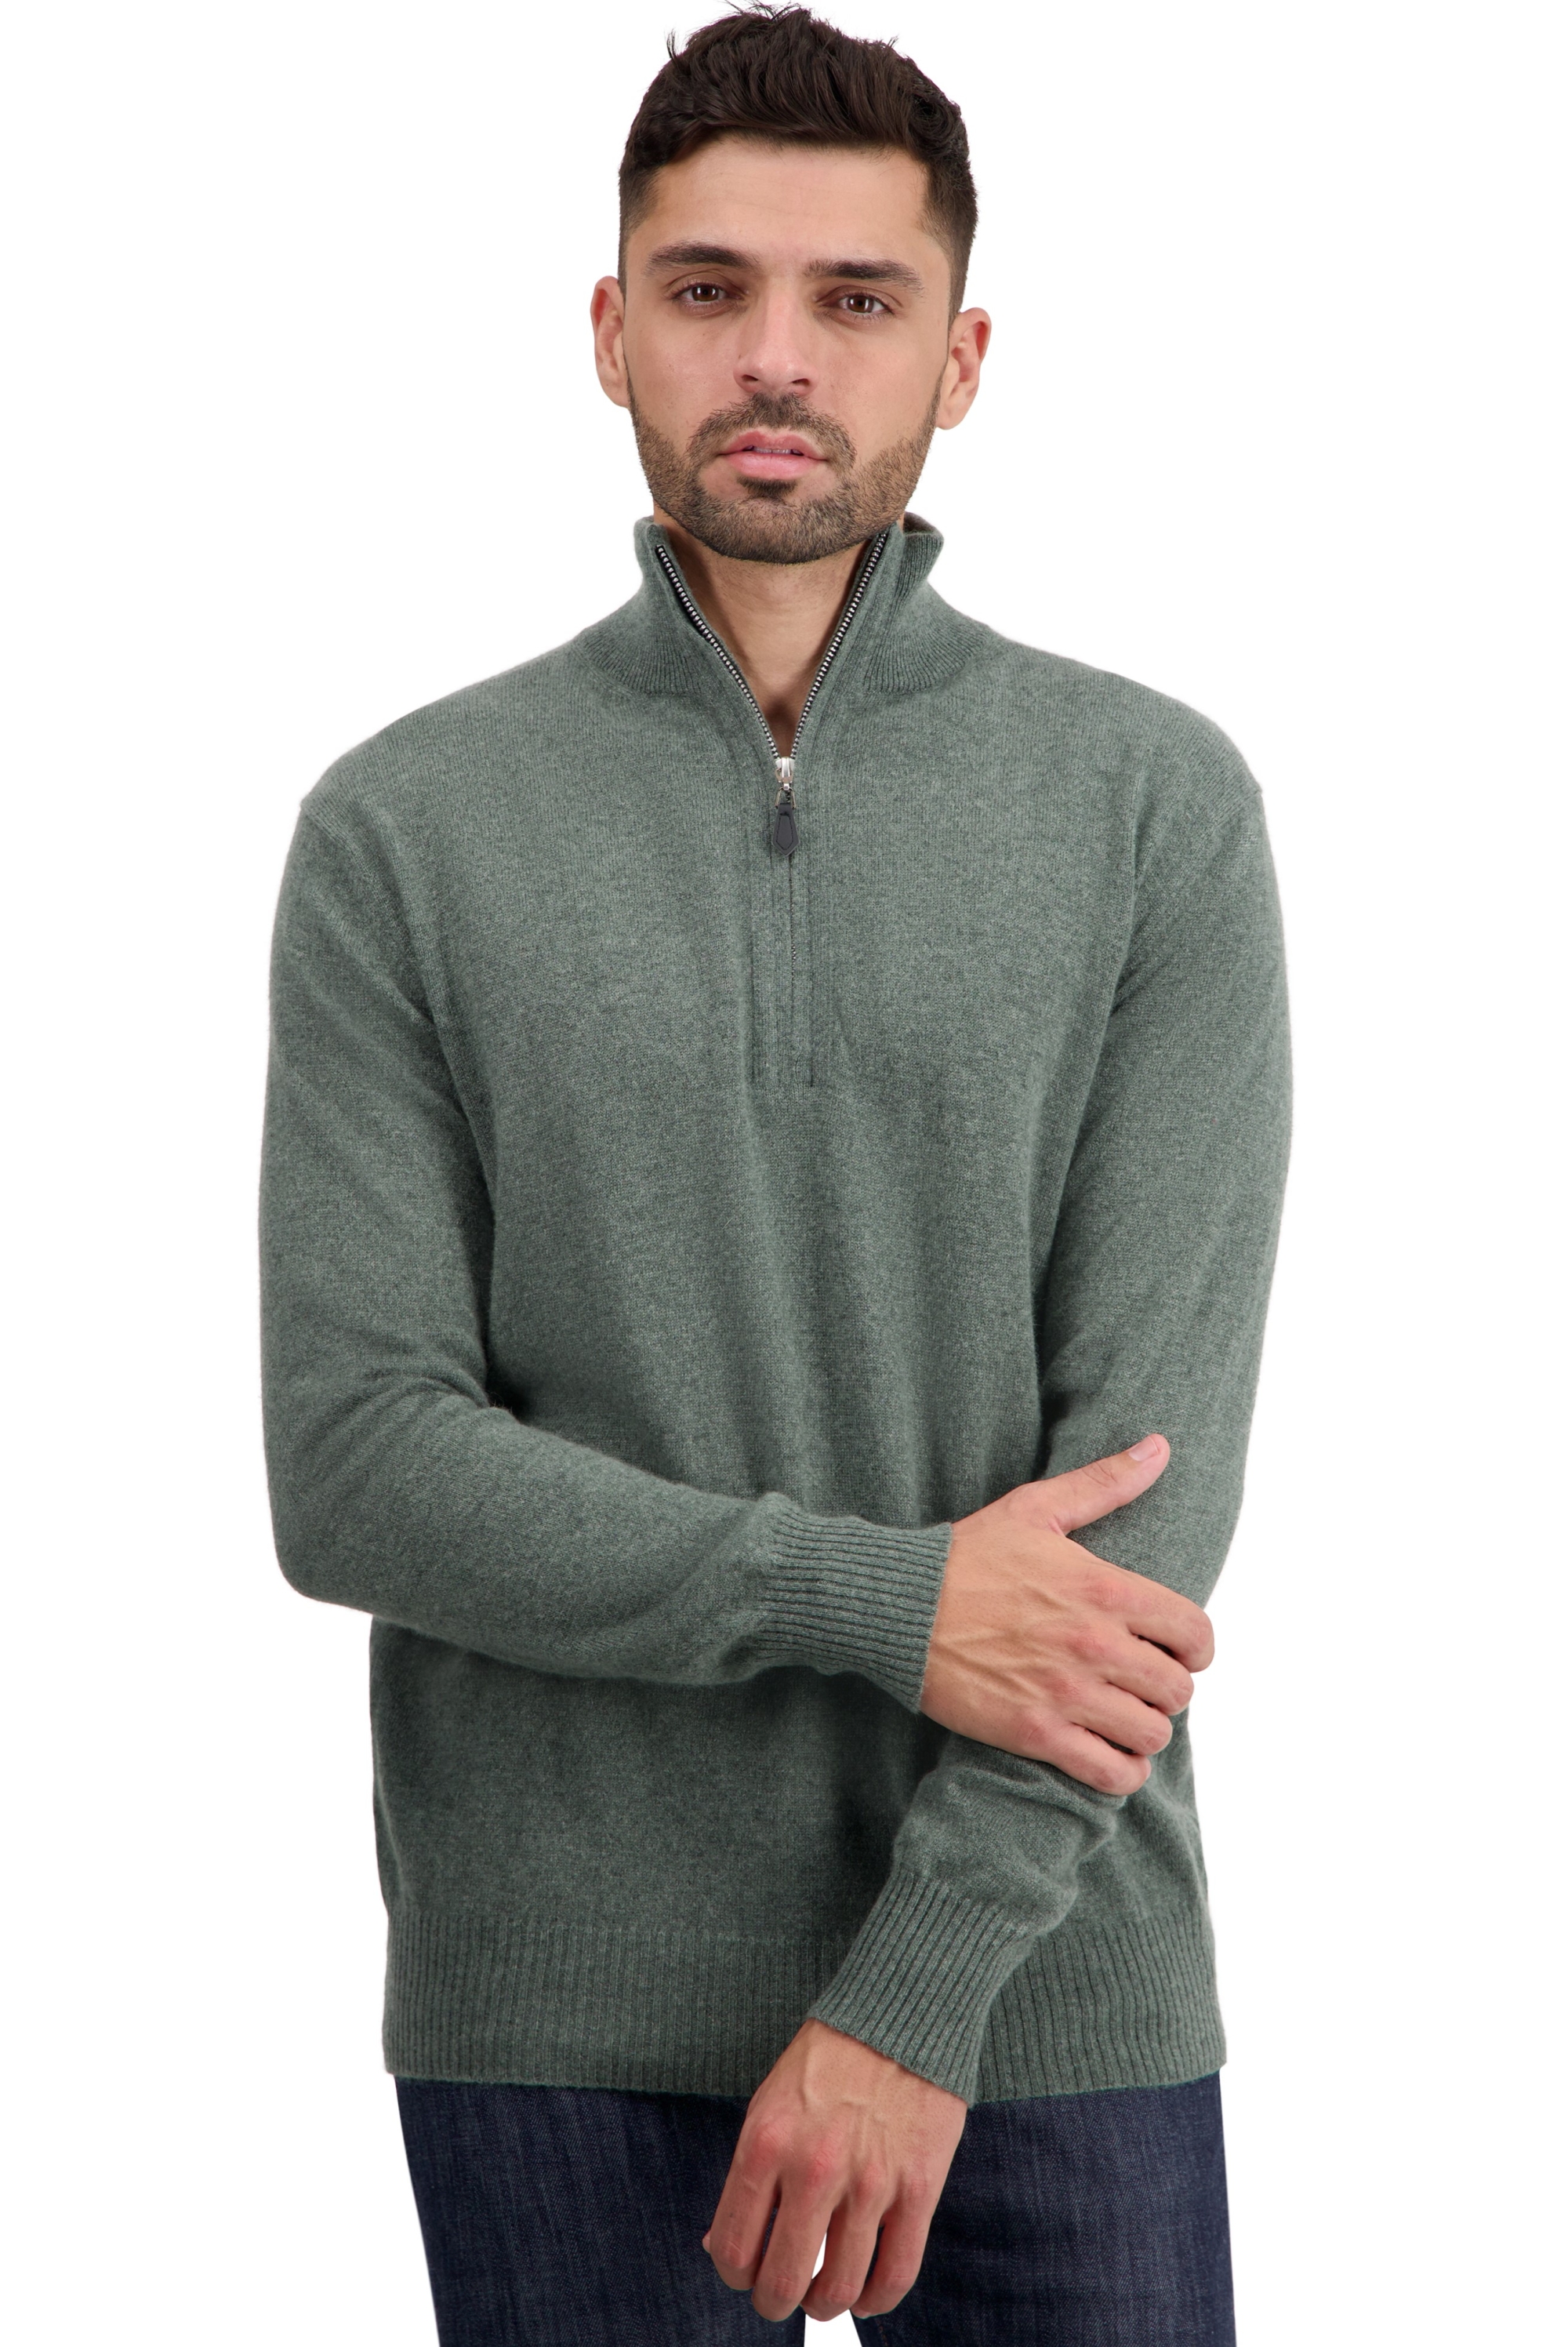 Cachemire petits prix homme toulon first military green 2xl